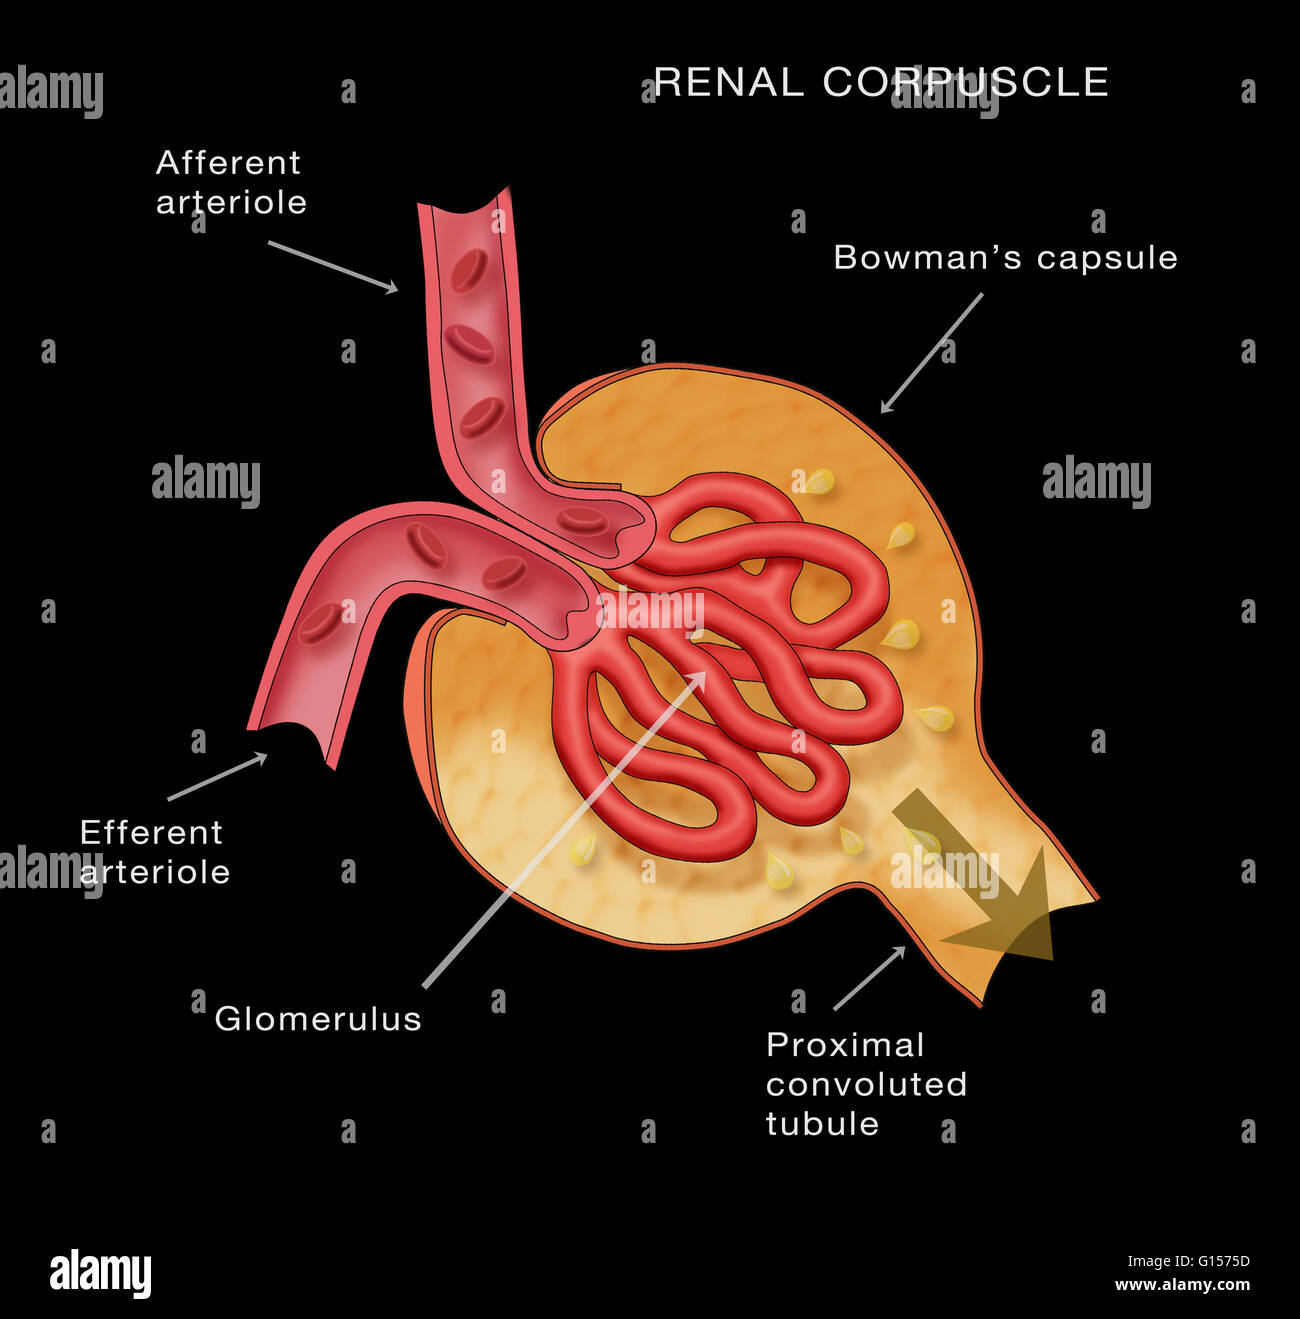 Renal Corpuscle. Kidney glomerulus anatomy. Diagram shows the Stock